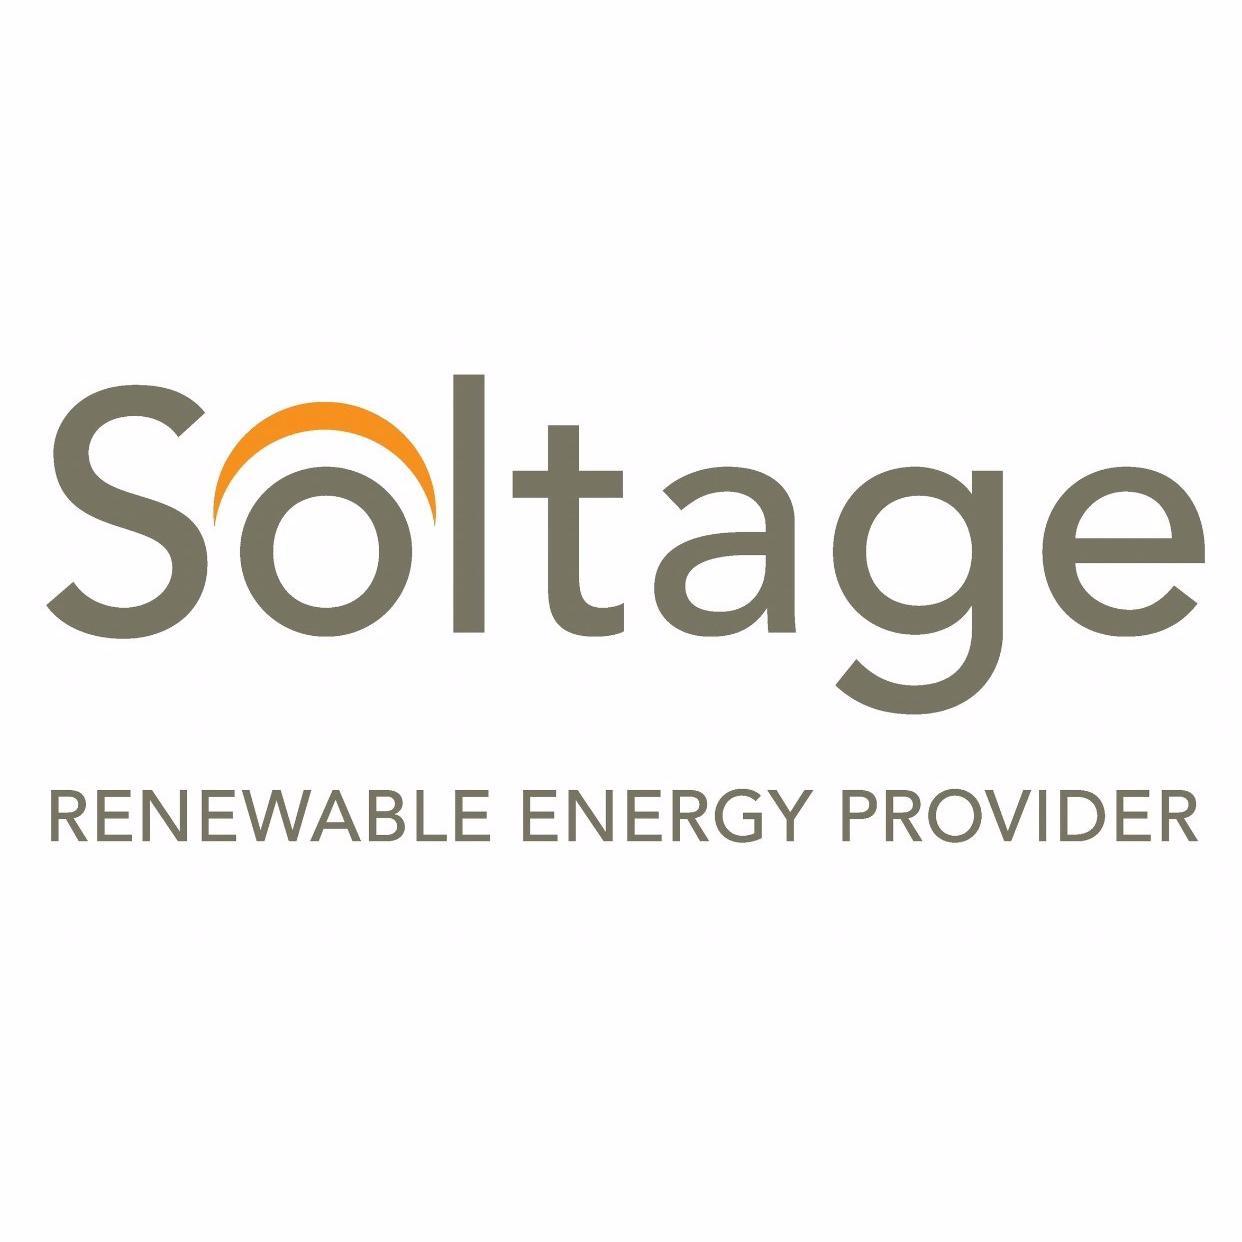 Soltage is a leader in the development, financing, & operation of distributed utility-scale solar & storage assets across the United States.